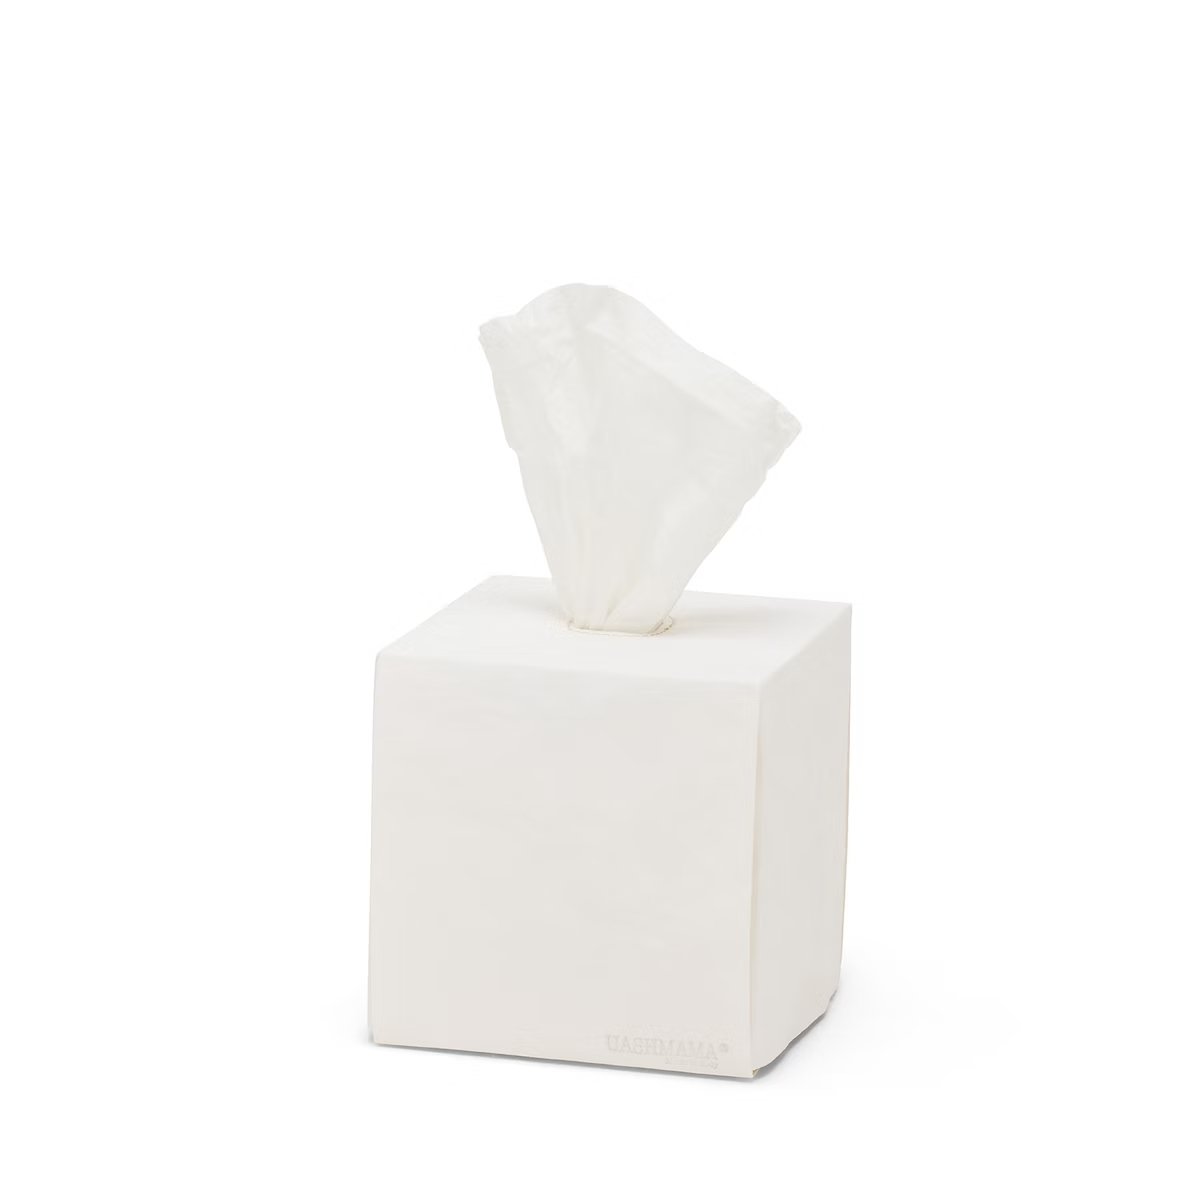 A square tissue box holder made of washable paper is shown, with a white tissue protruding from the top of the box. The UASHMAMA logo is printed in white lettering on the bottom right hand corner of the box. The tissue box cover is white.